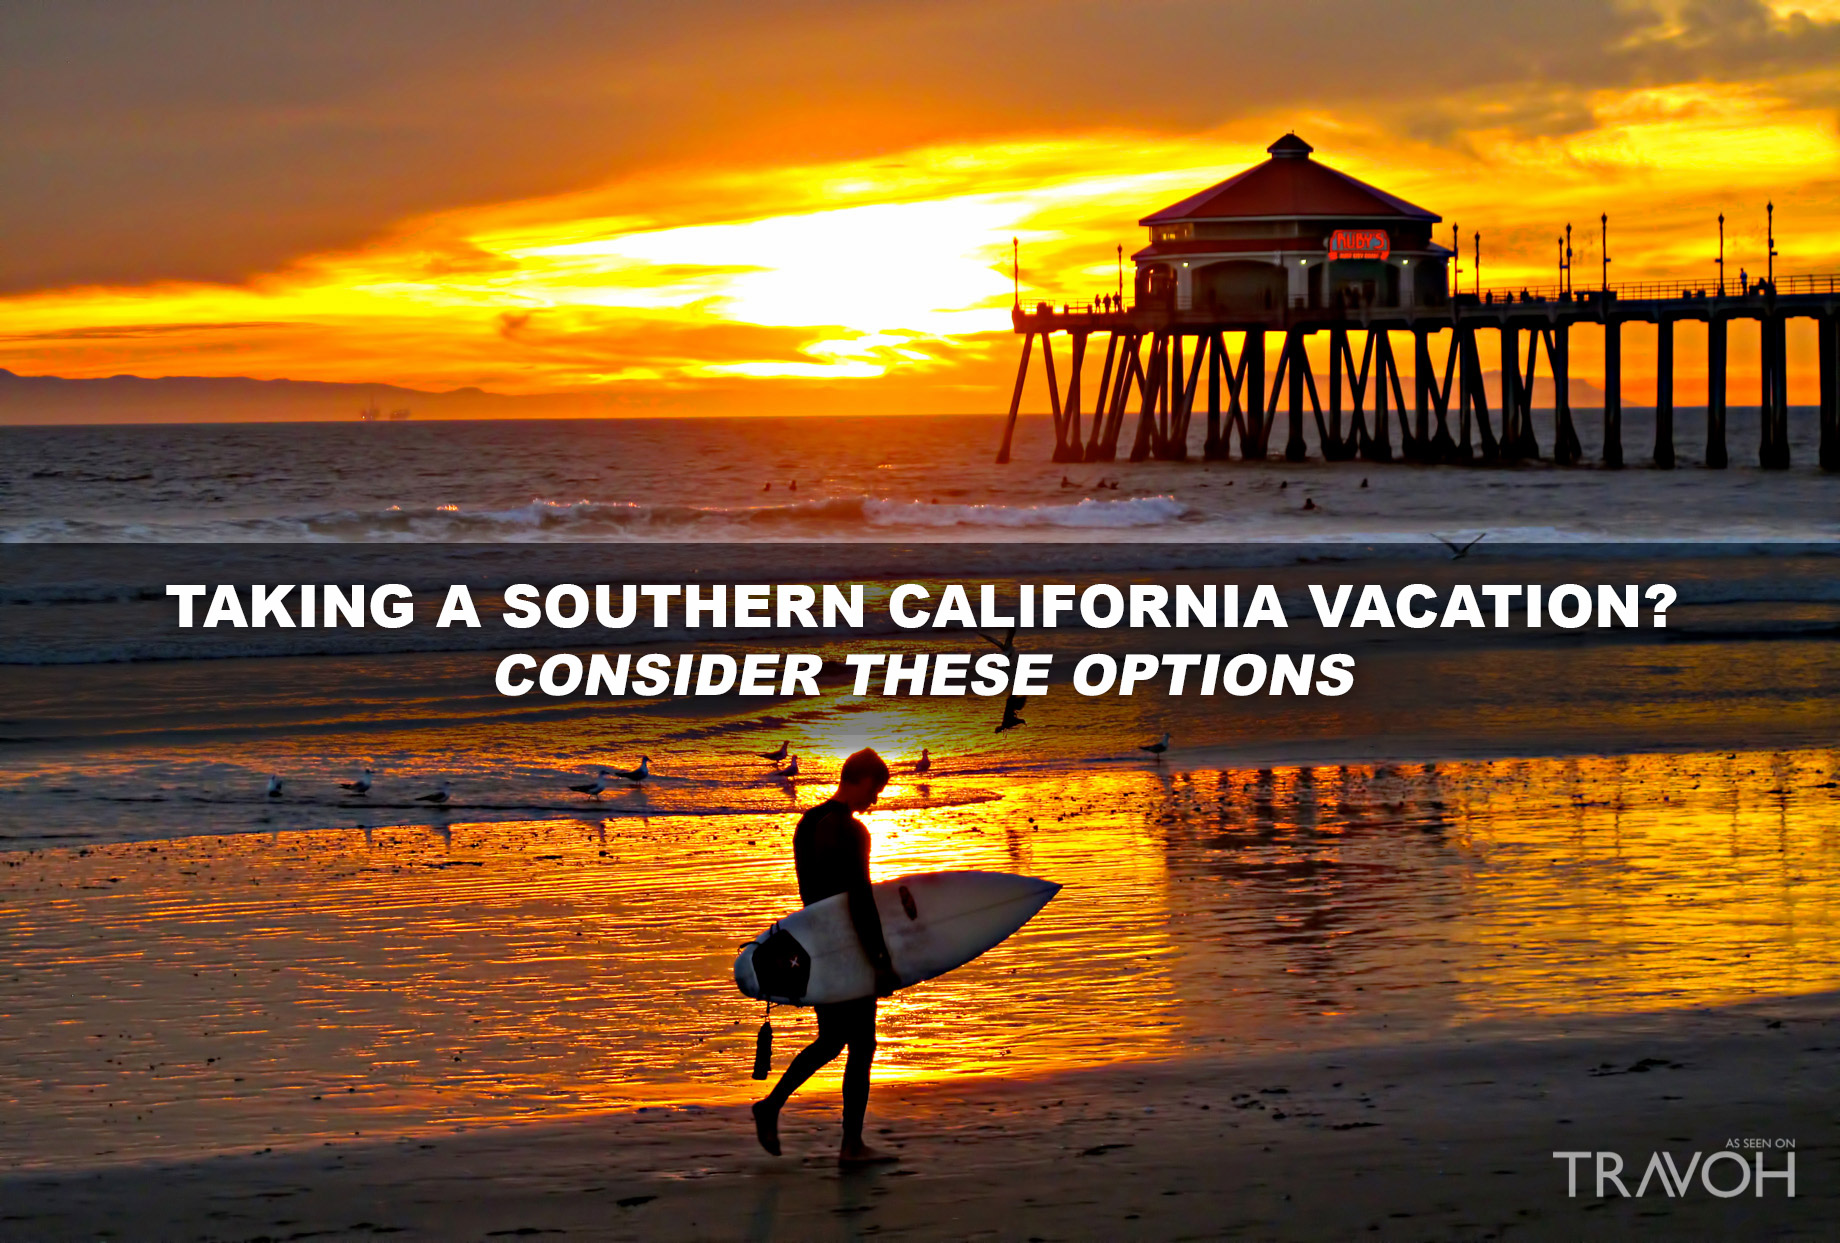 Taking a Southern California Vacation - Consider These Options